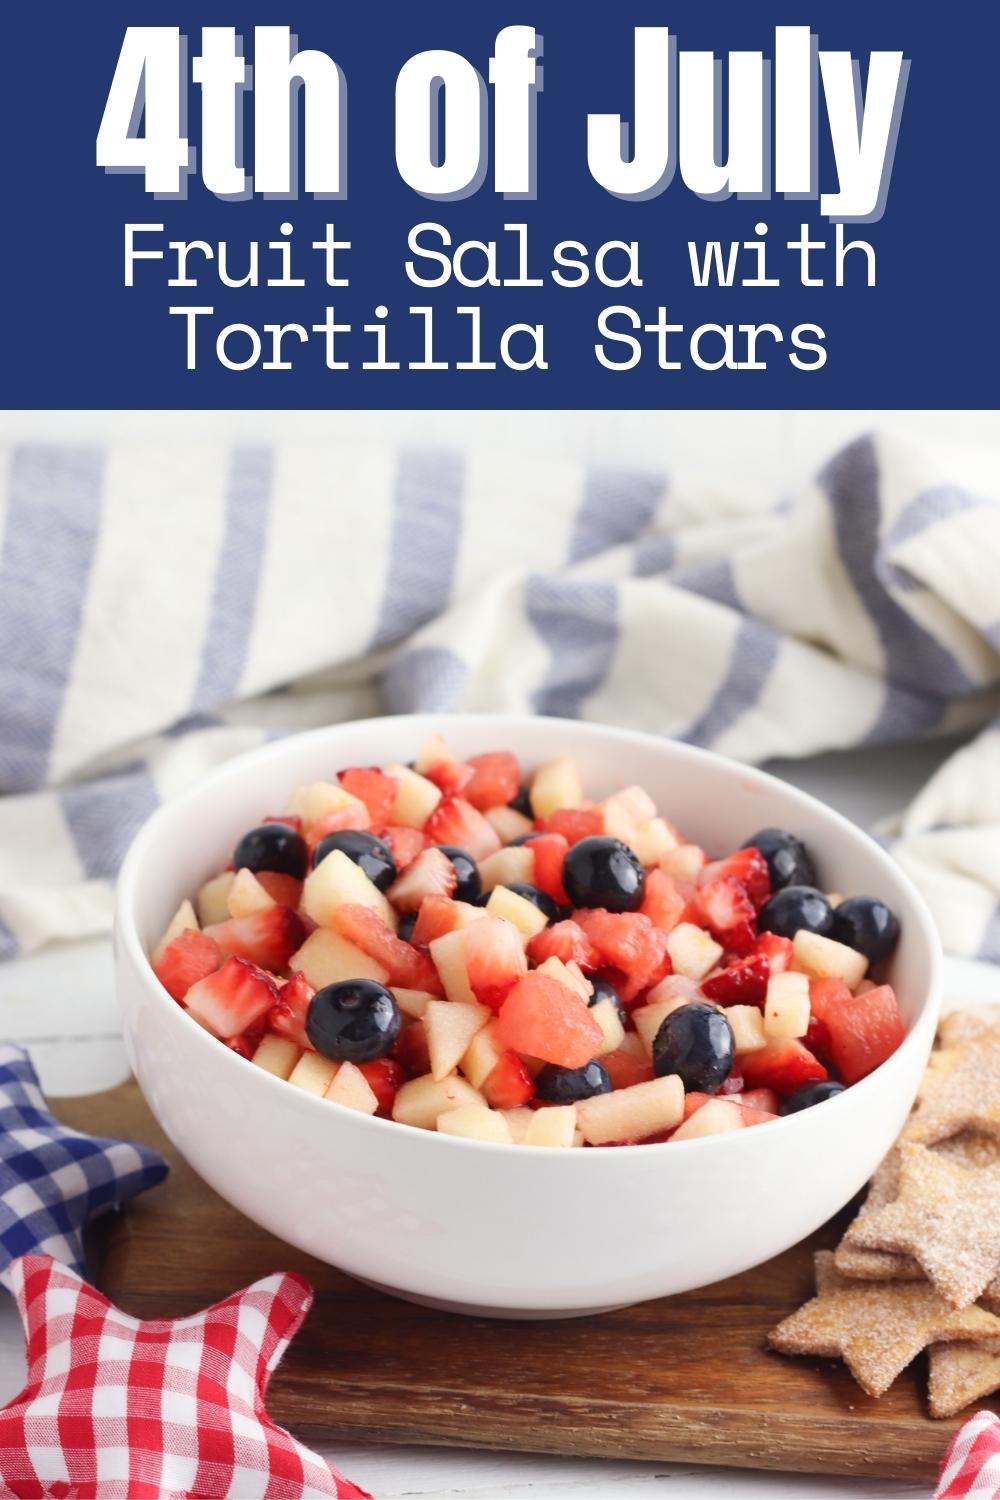 Pinterest Image for a delicious and simple 4th of July fruit Salad with cinnamon tortilla chips